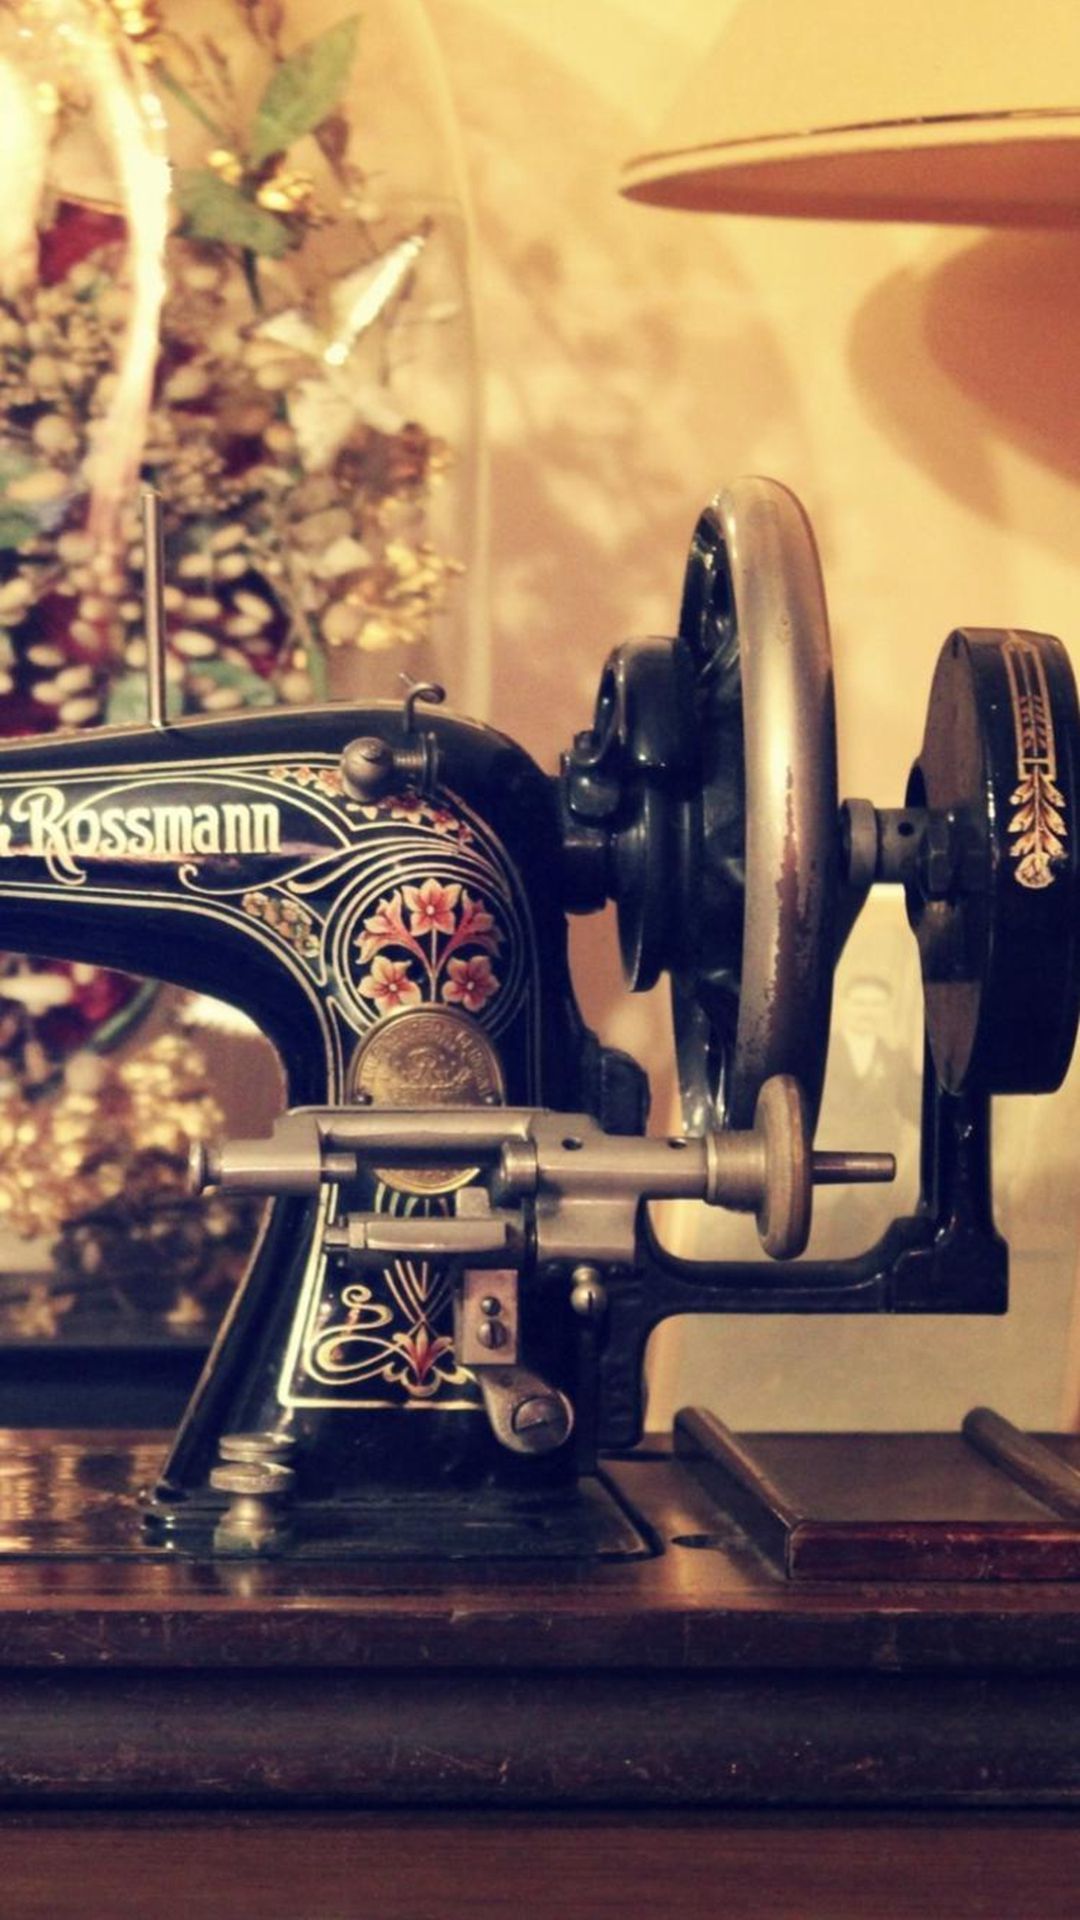 Retro Sewing Machine Table #iPhone #plus #wallpaper. iPhone wallpaper vintage, iPhone wallpaper hipster, Android wallpaper